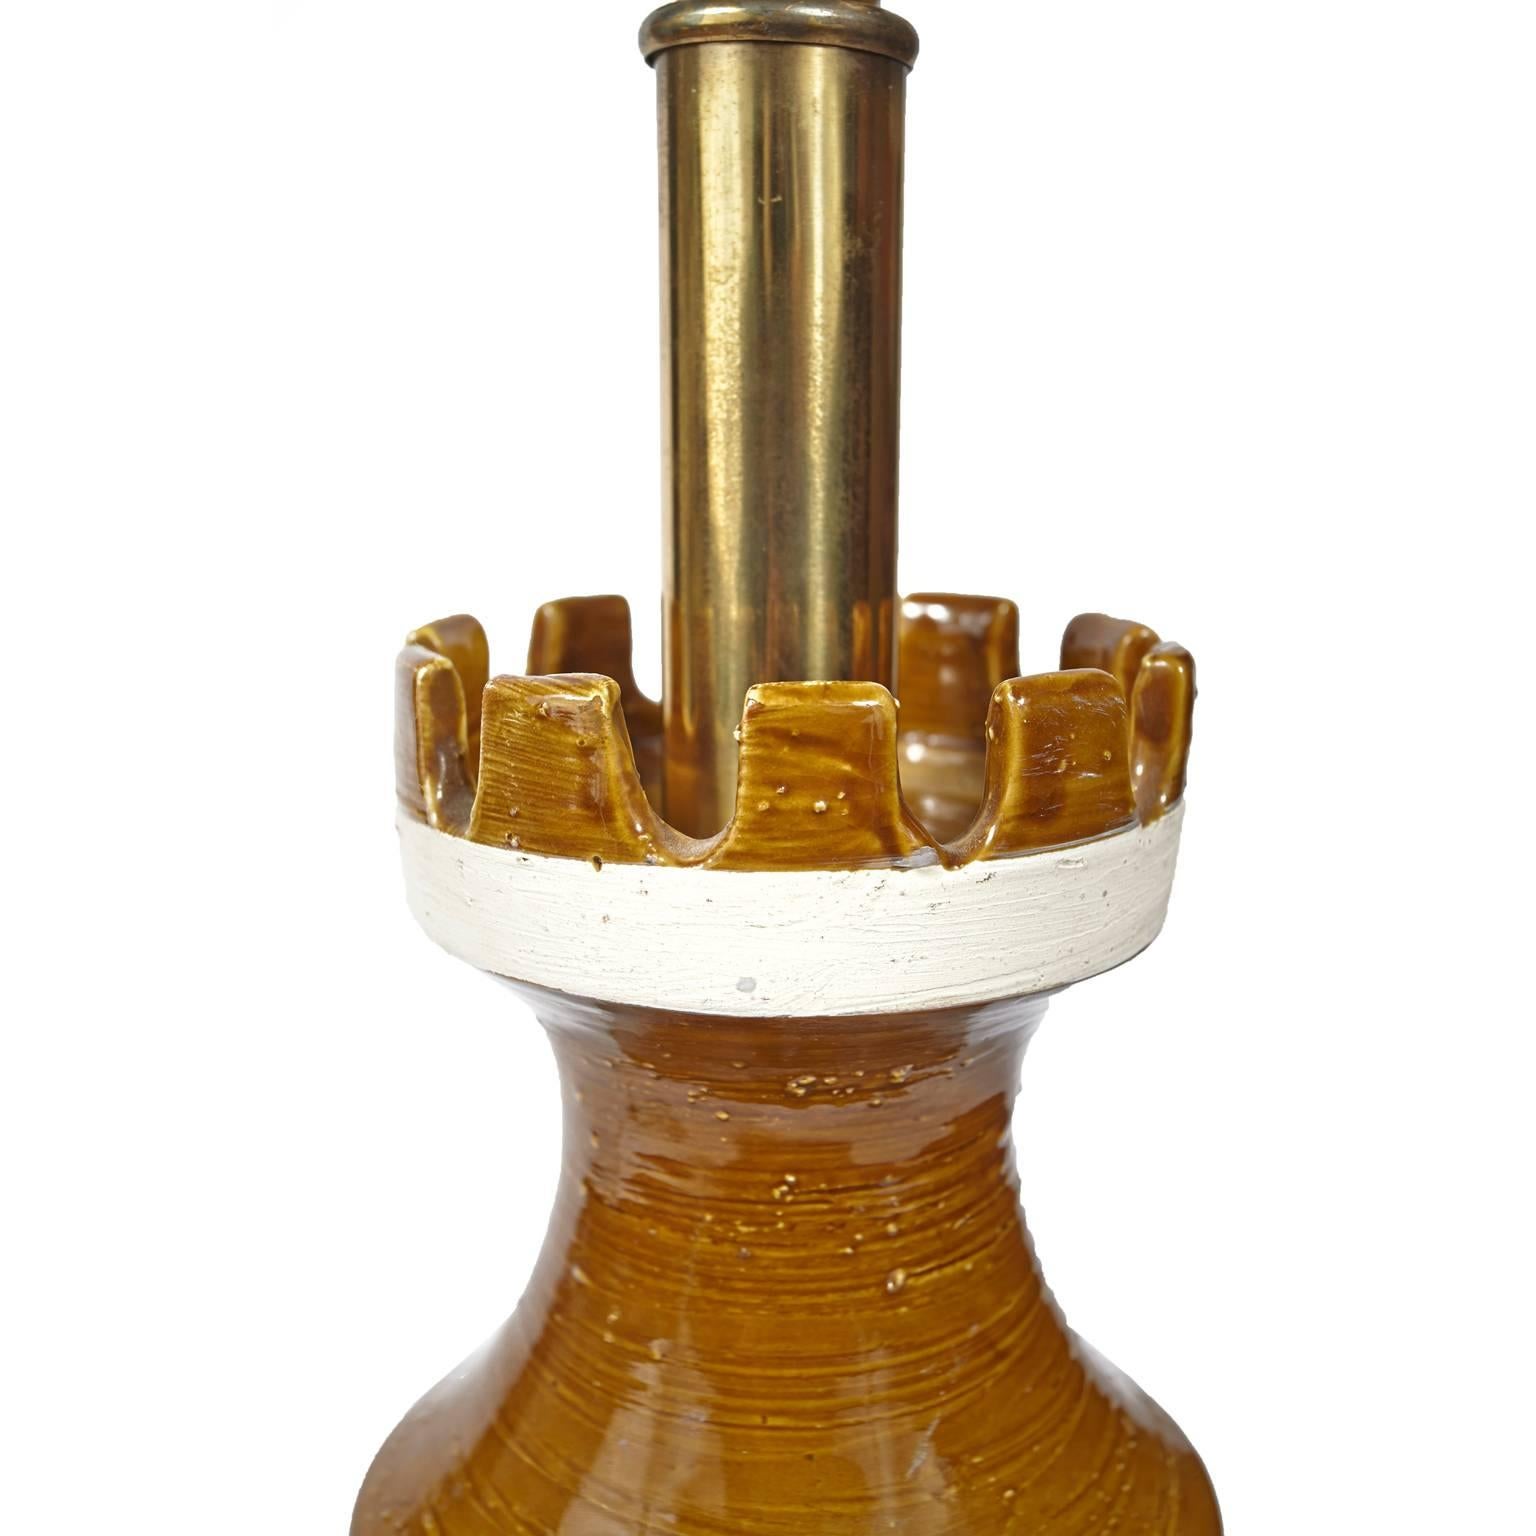 Unique Bitossi, Italian, Mid-Century Modern table lamp. Cream and Carmel colored incised lamp with crown like top. Marked on bottom.